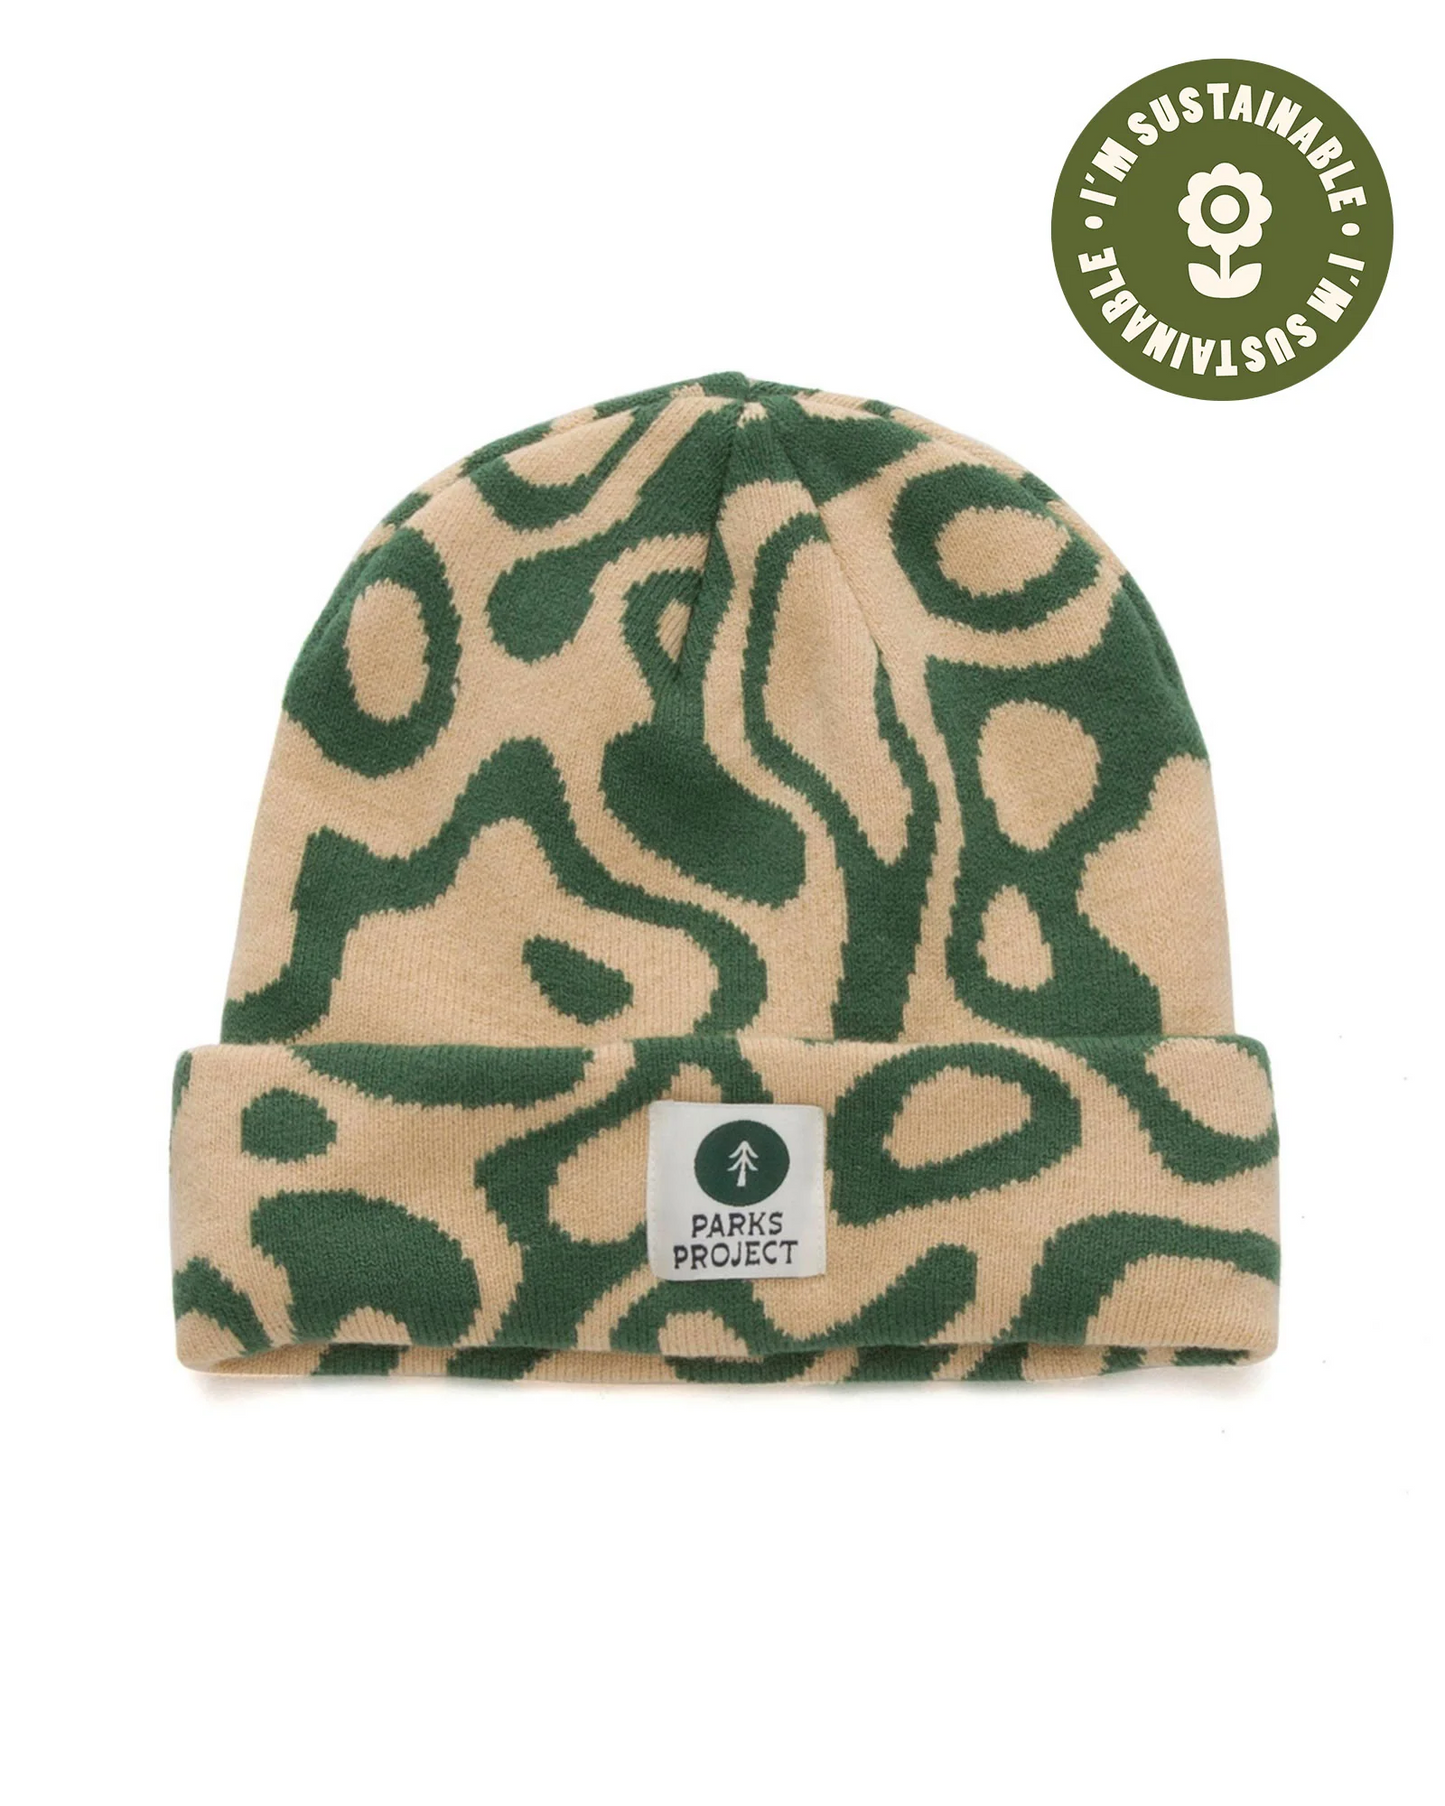 Parks Project Yellowstone Geysers Beanie